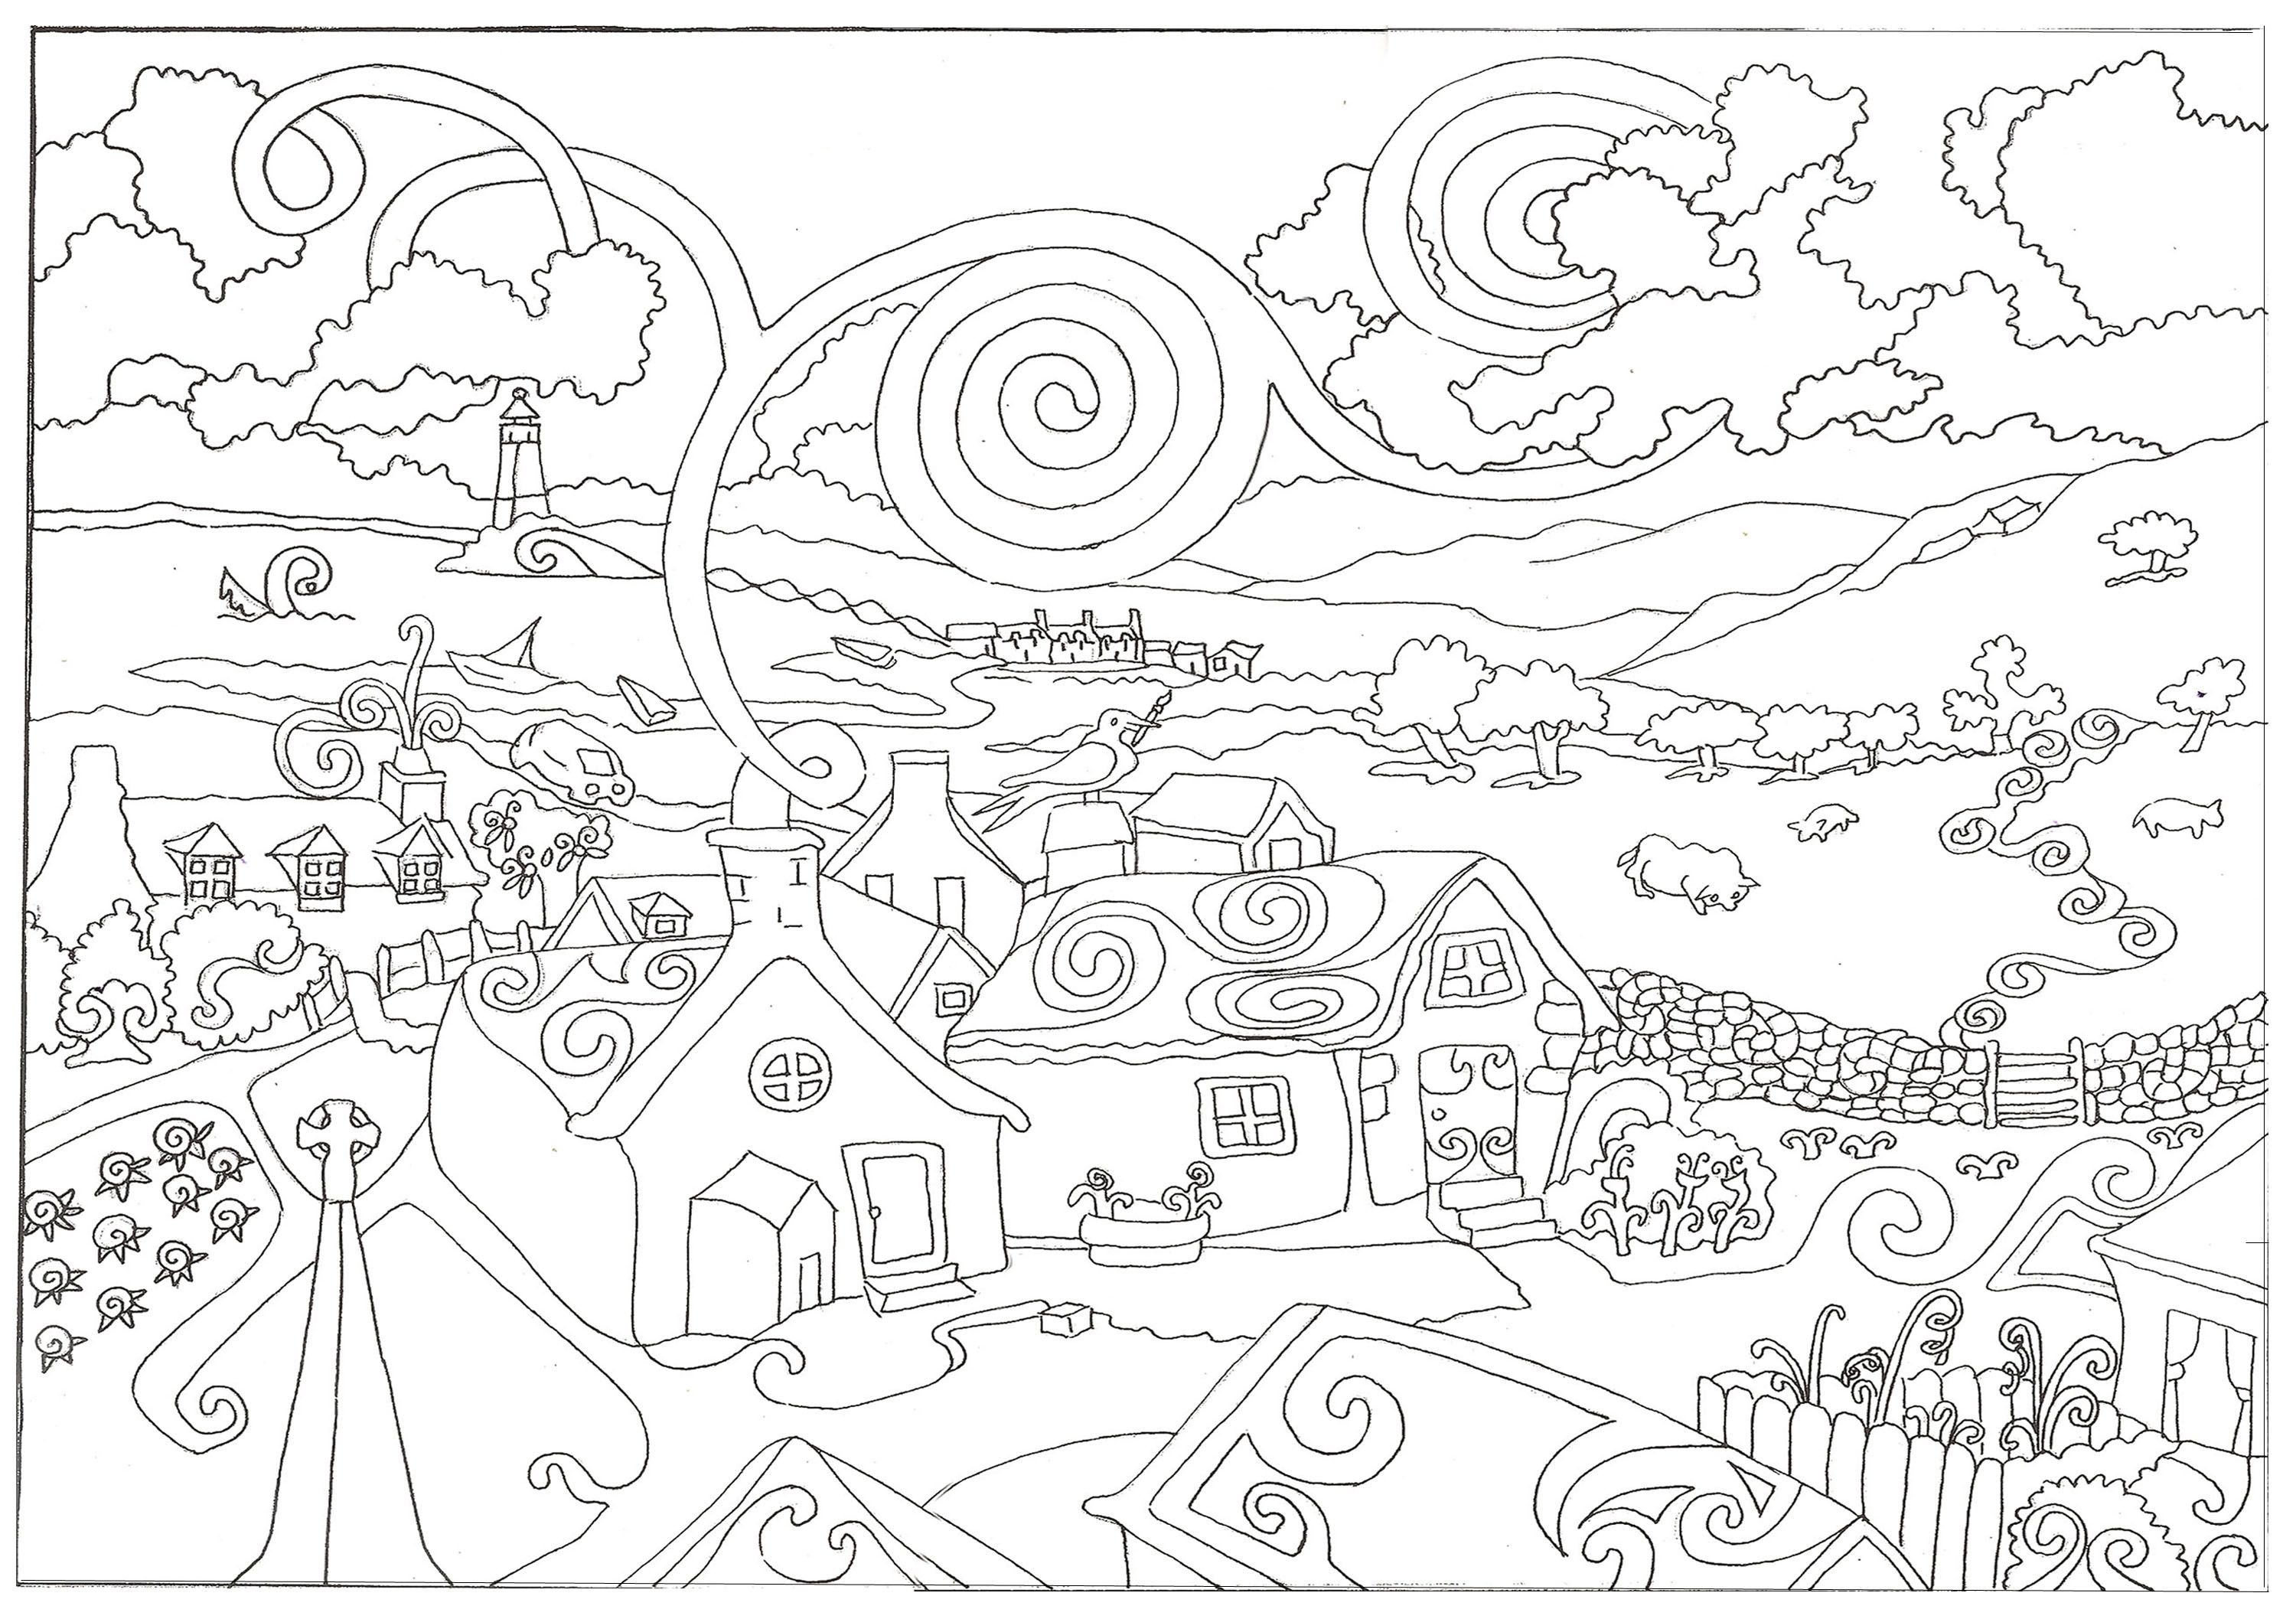 Challenging Printable - Coloring Pages for Kids and for Adults